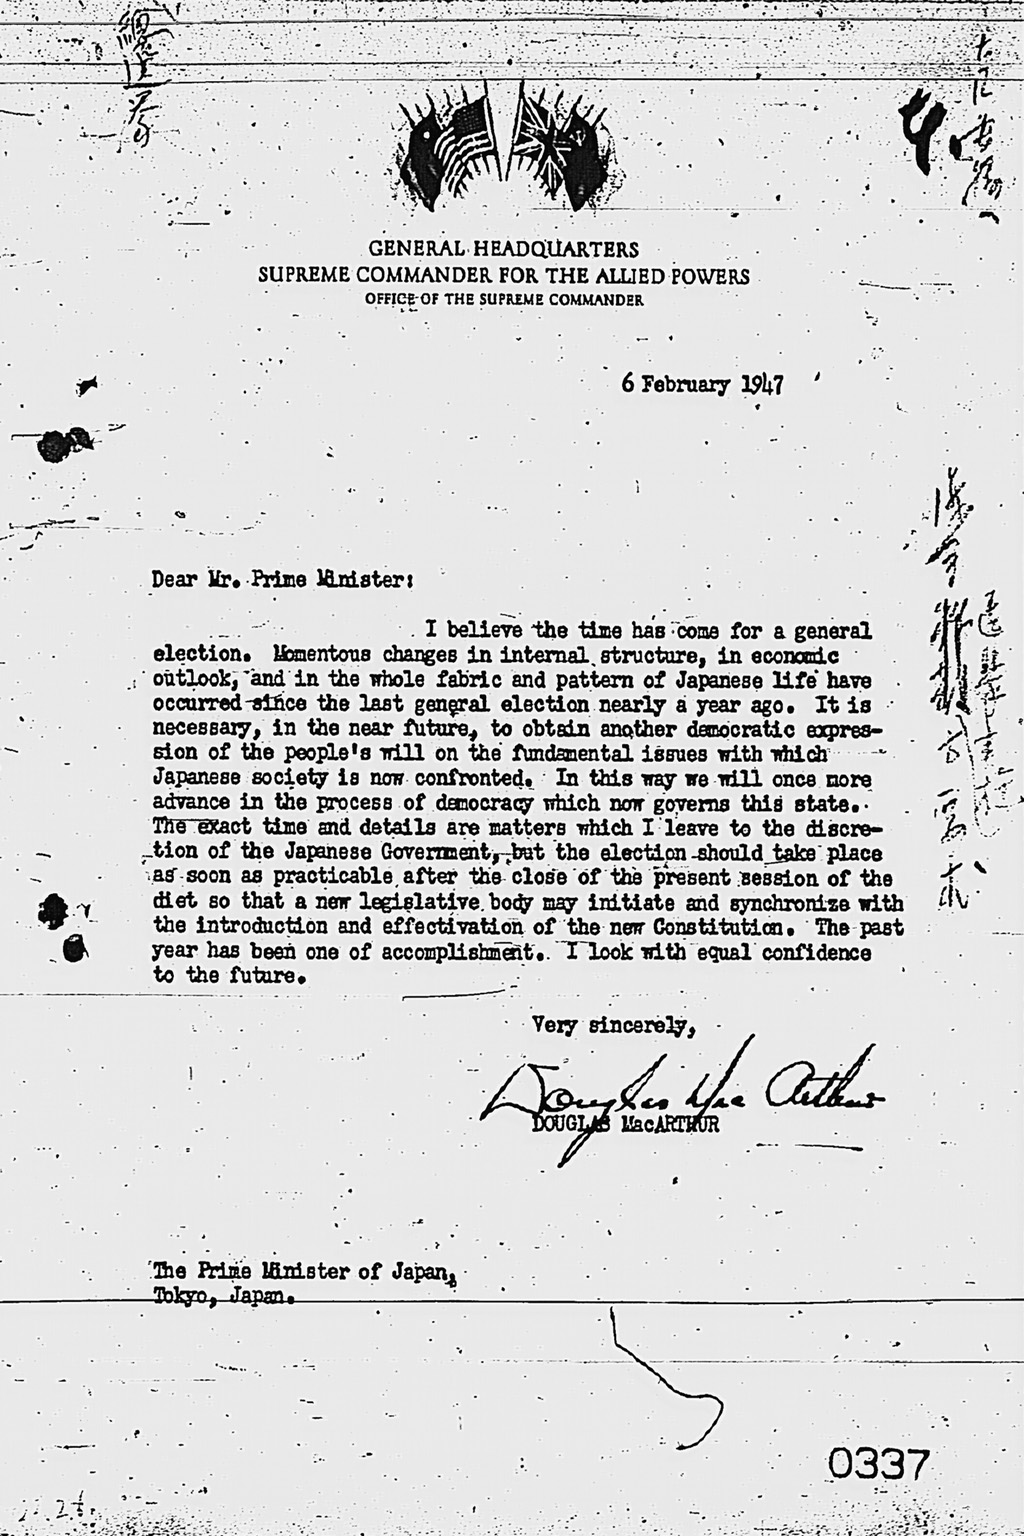 [Letter from Douglas MacArthur to Prime Minister, dated 6 February 1947](Larger image)